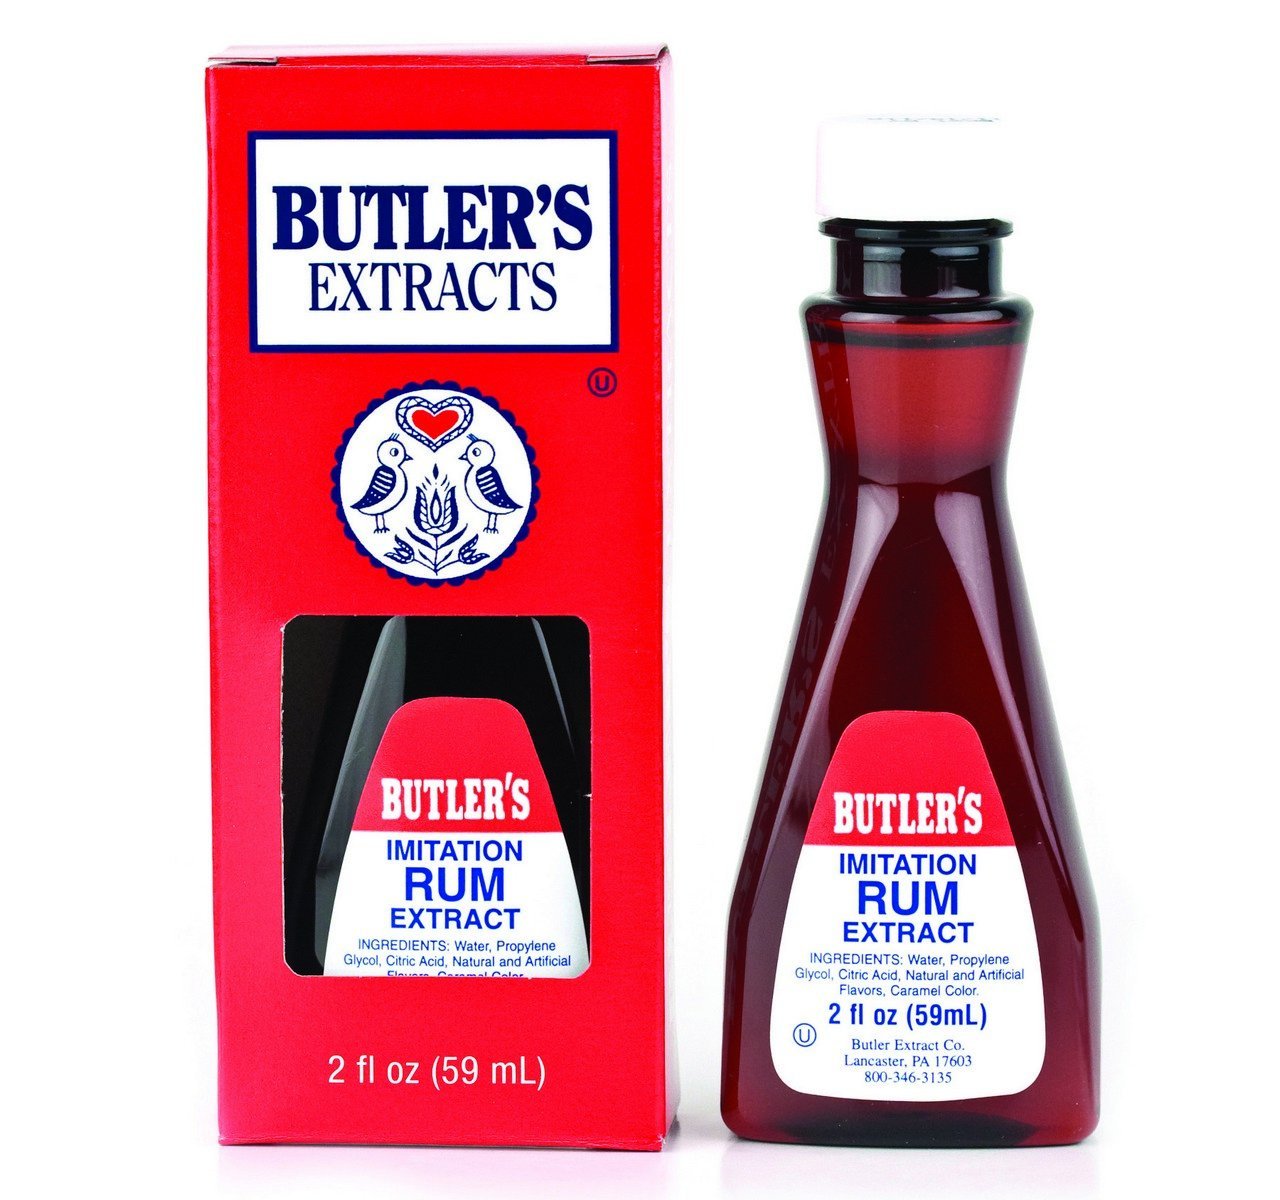 Butler's Imitation Rum Extract, 2 Oz. Bottle (Pack of 2) - $12.86